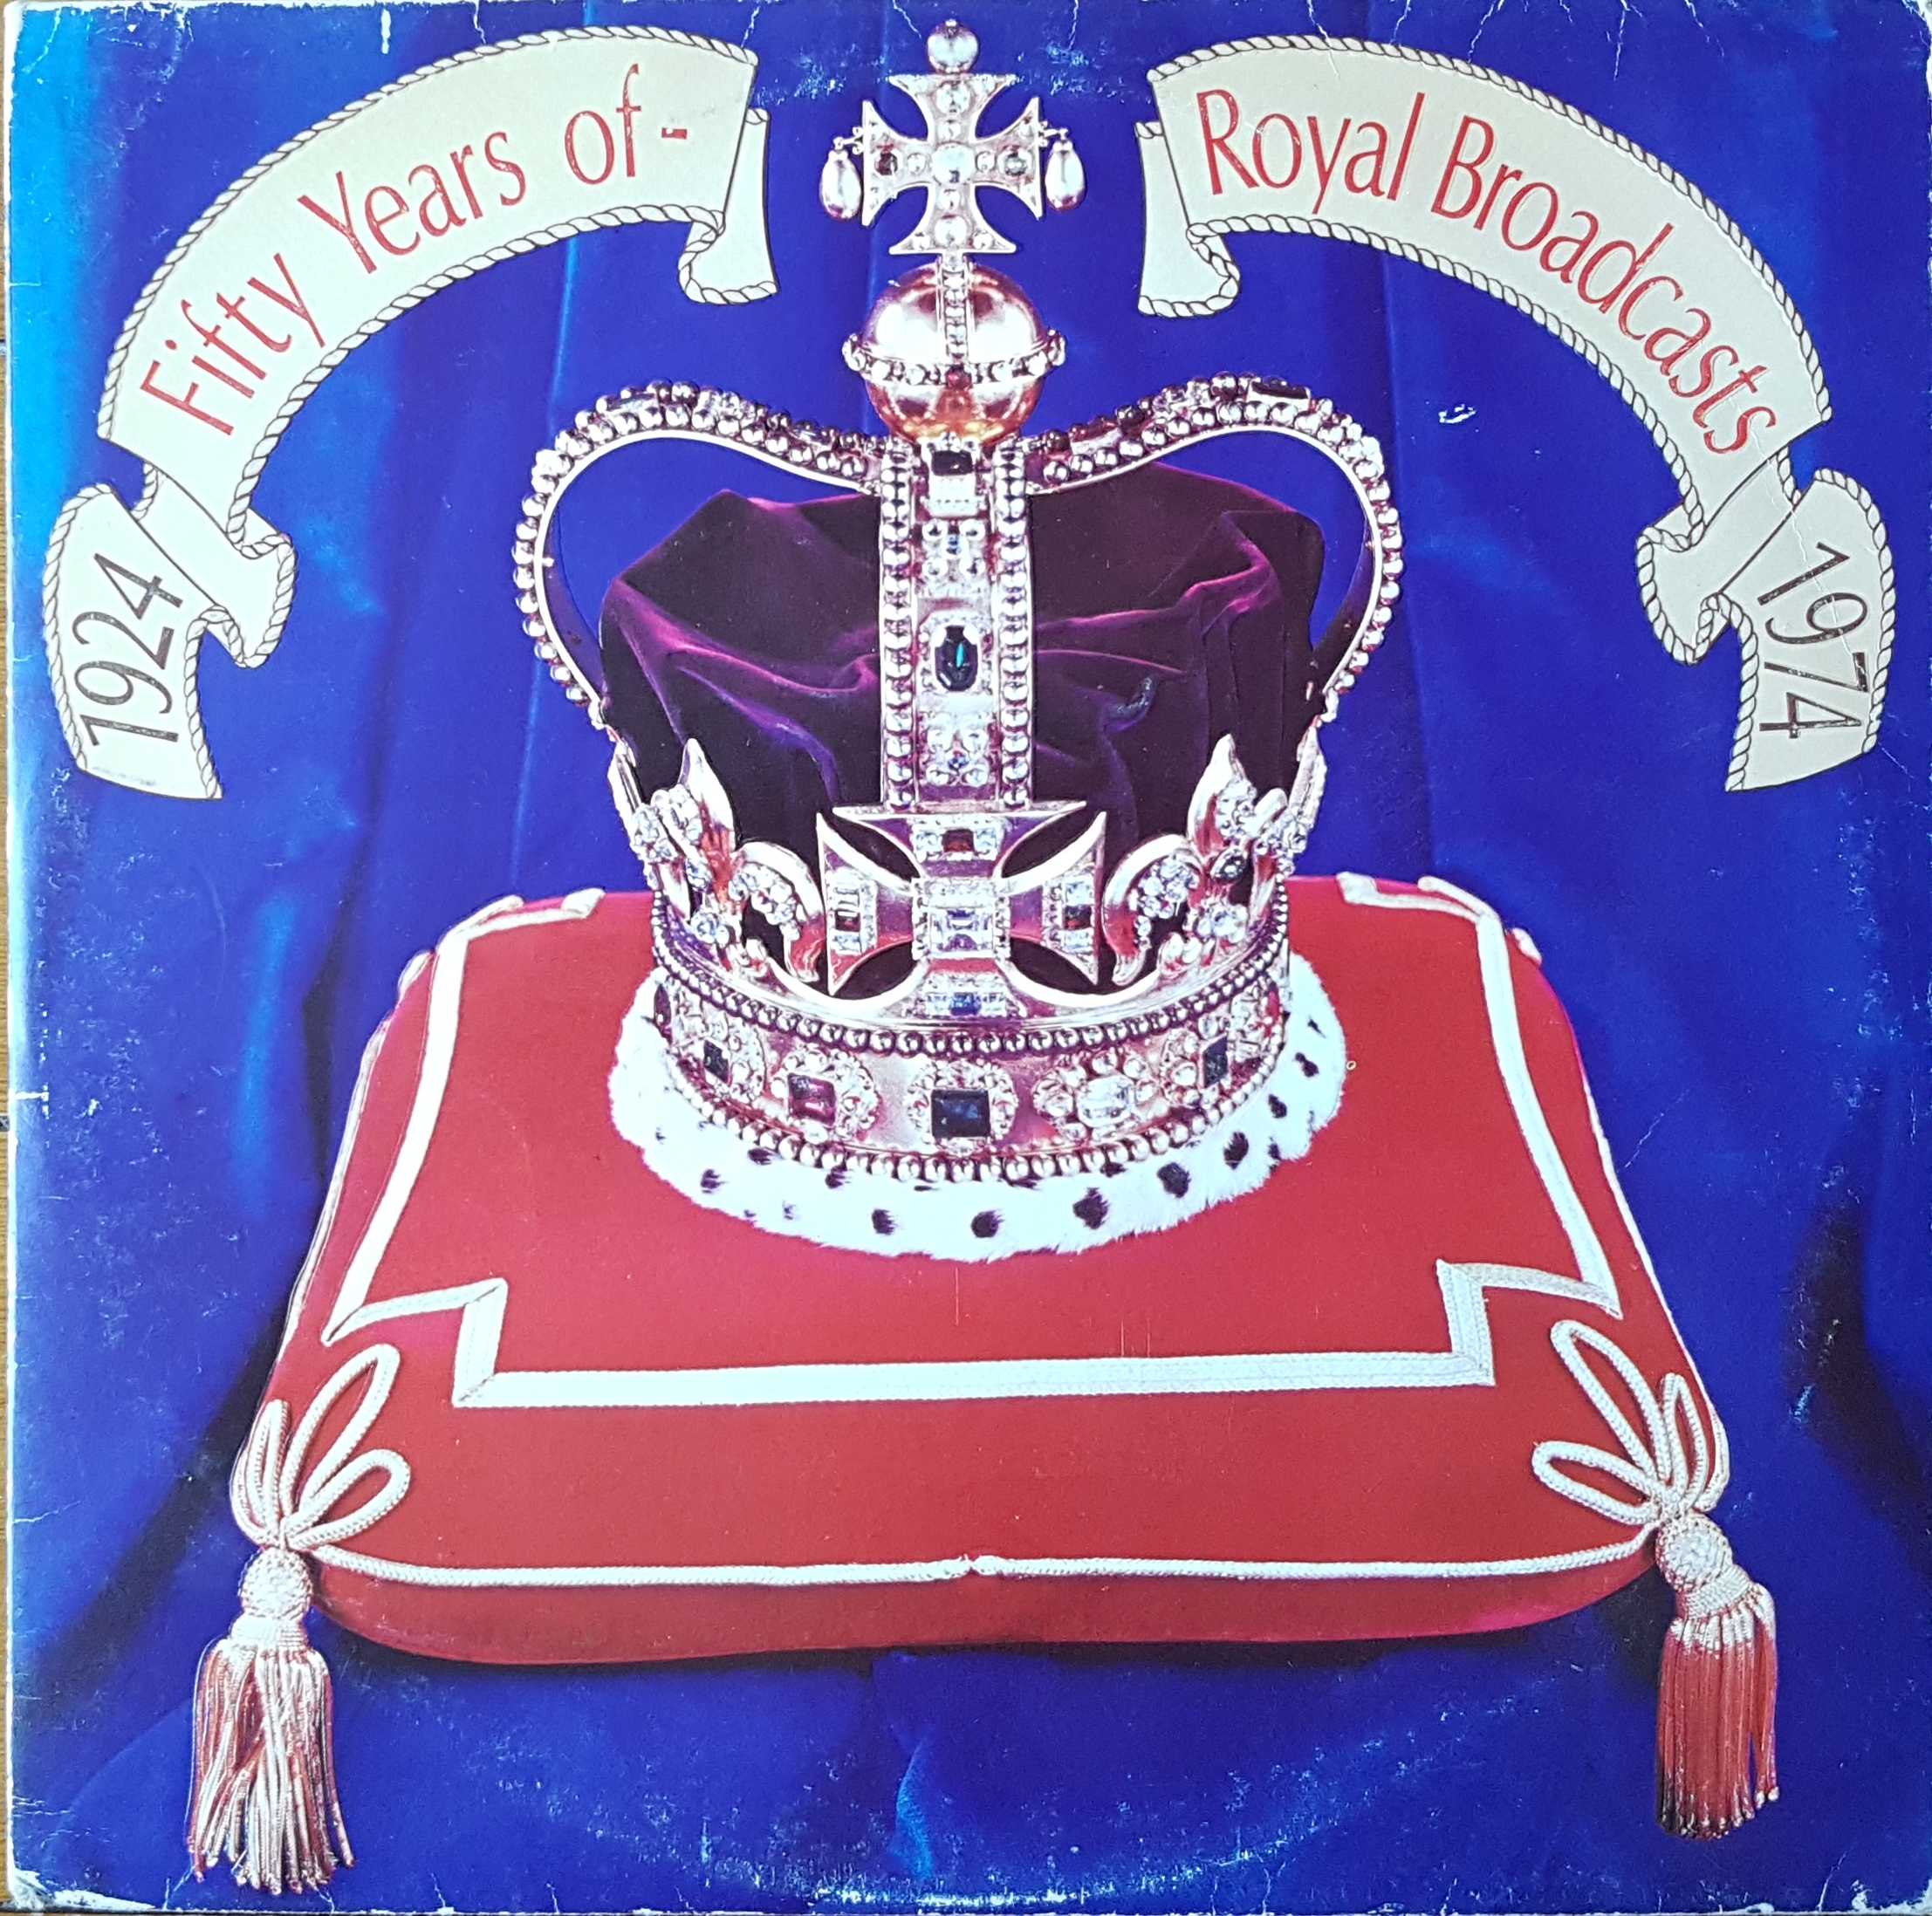 Picture of REJ 187 50 years of Royal broadcasts (W/L test pressing) by artist Various from the BBC albums - Records and Tapes library